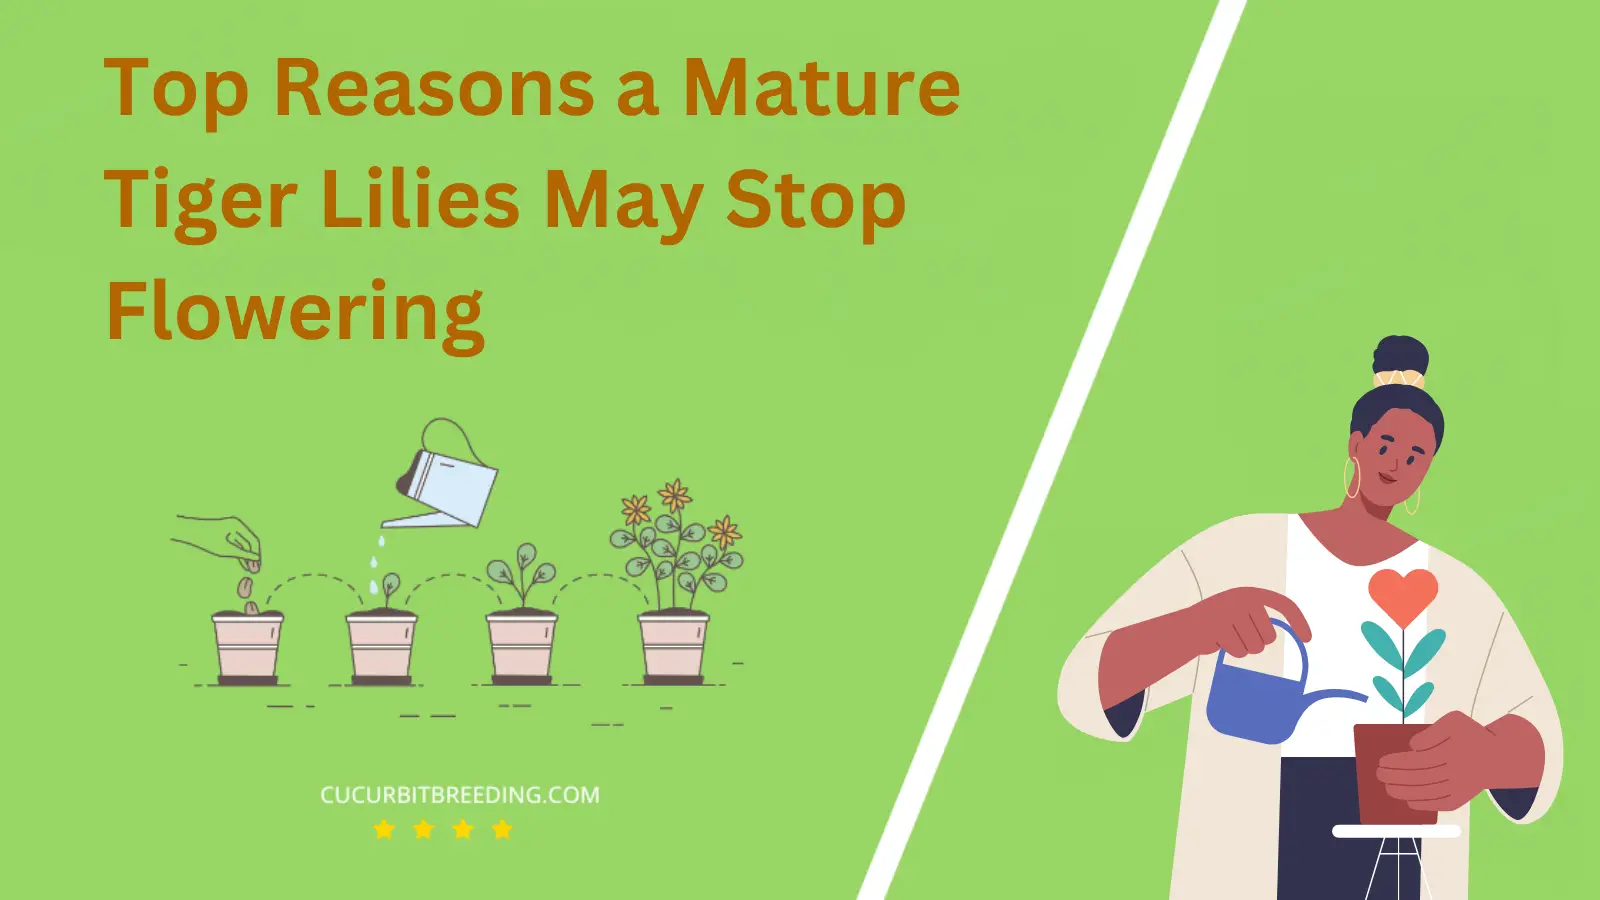 Top Reasons a Mature Tiger Lilies May Stop Flowering